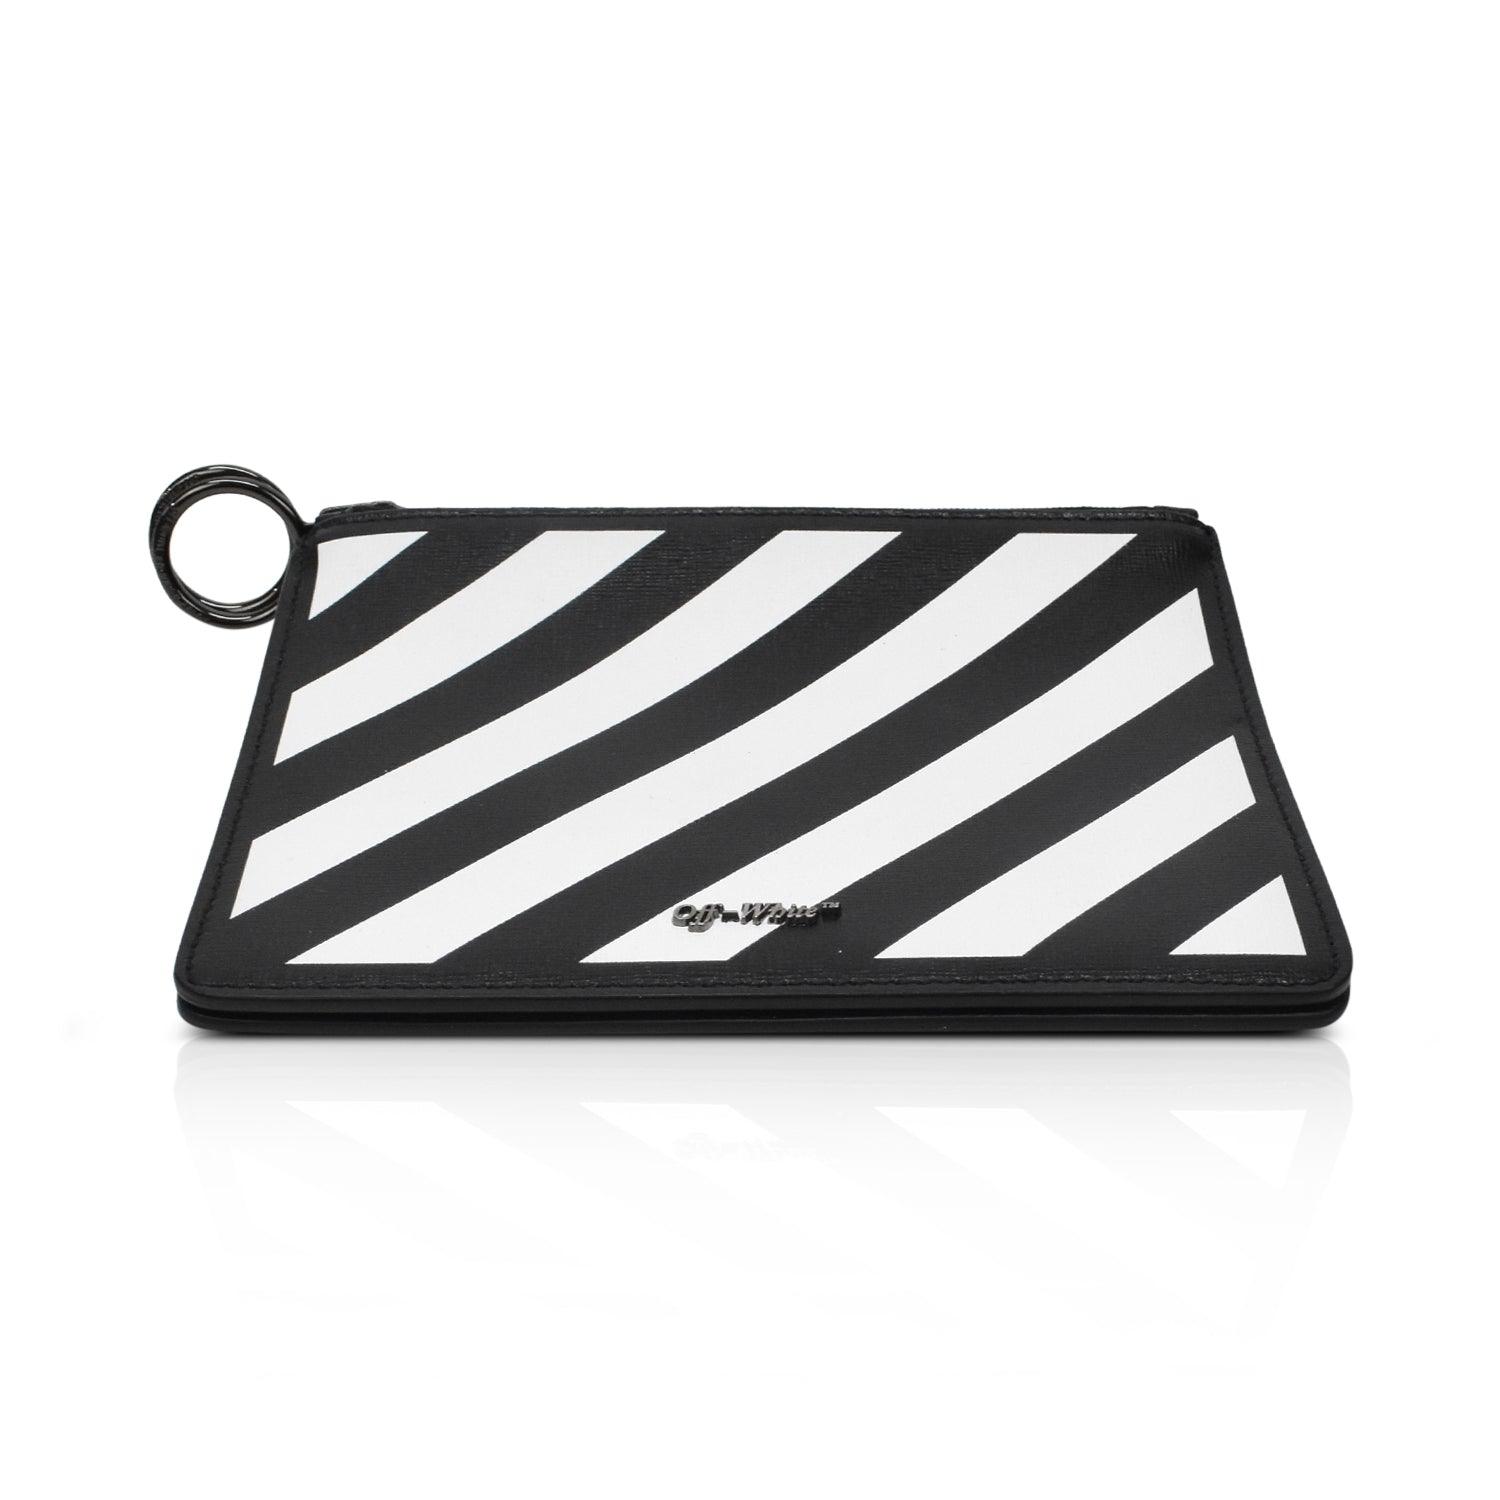 Off-White Zip Pouch - Fashionably Yours